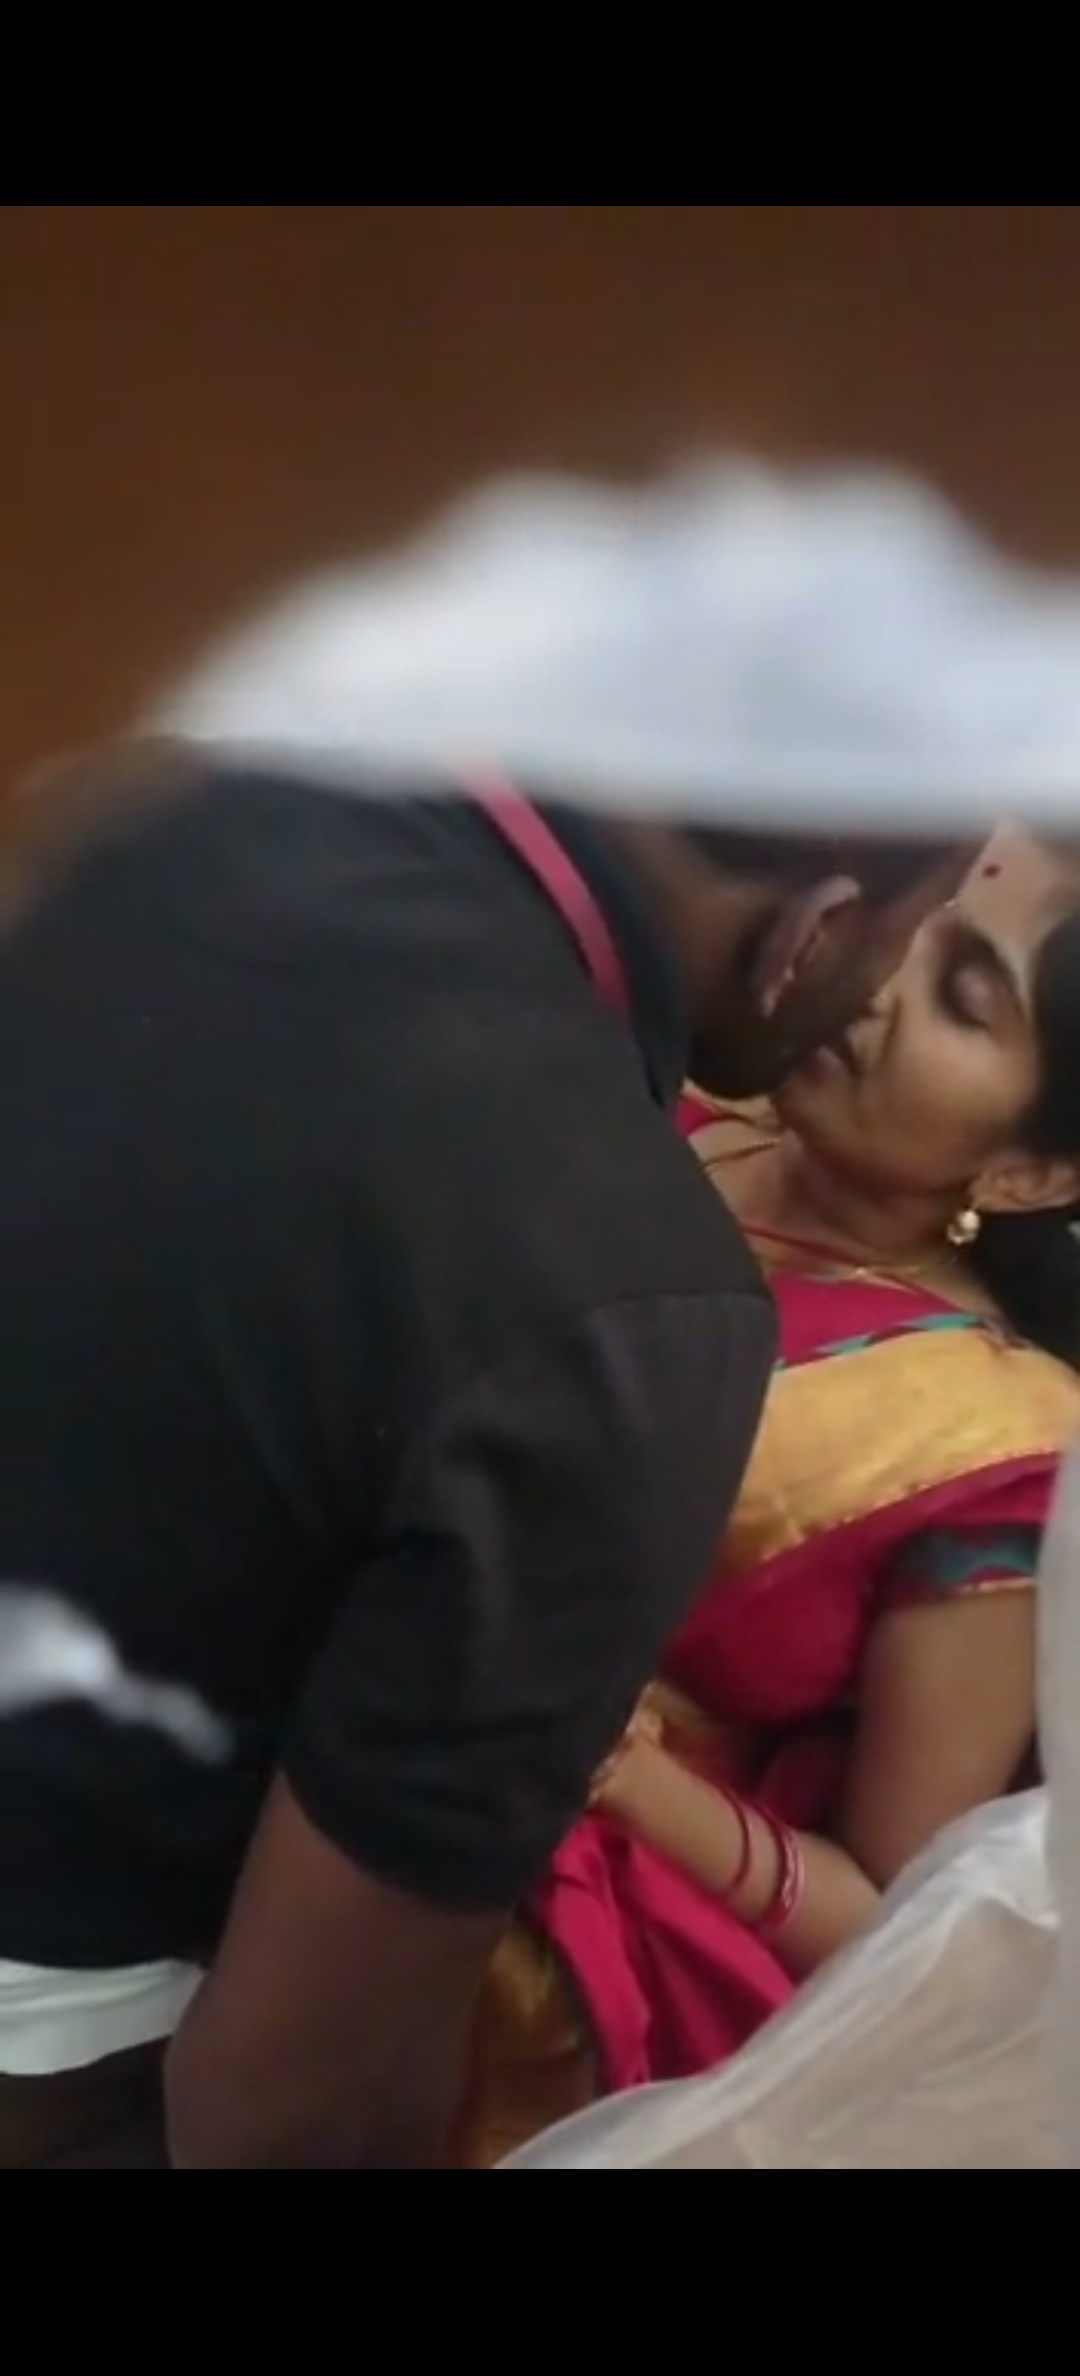 Sexy sexy Tamil Lovers Store Room Hidden Full… ThisVid image pic image